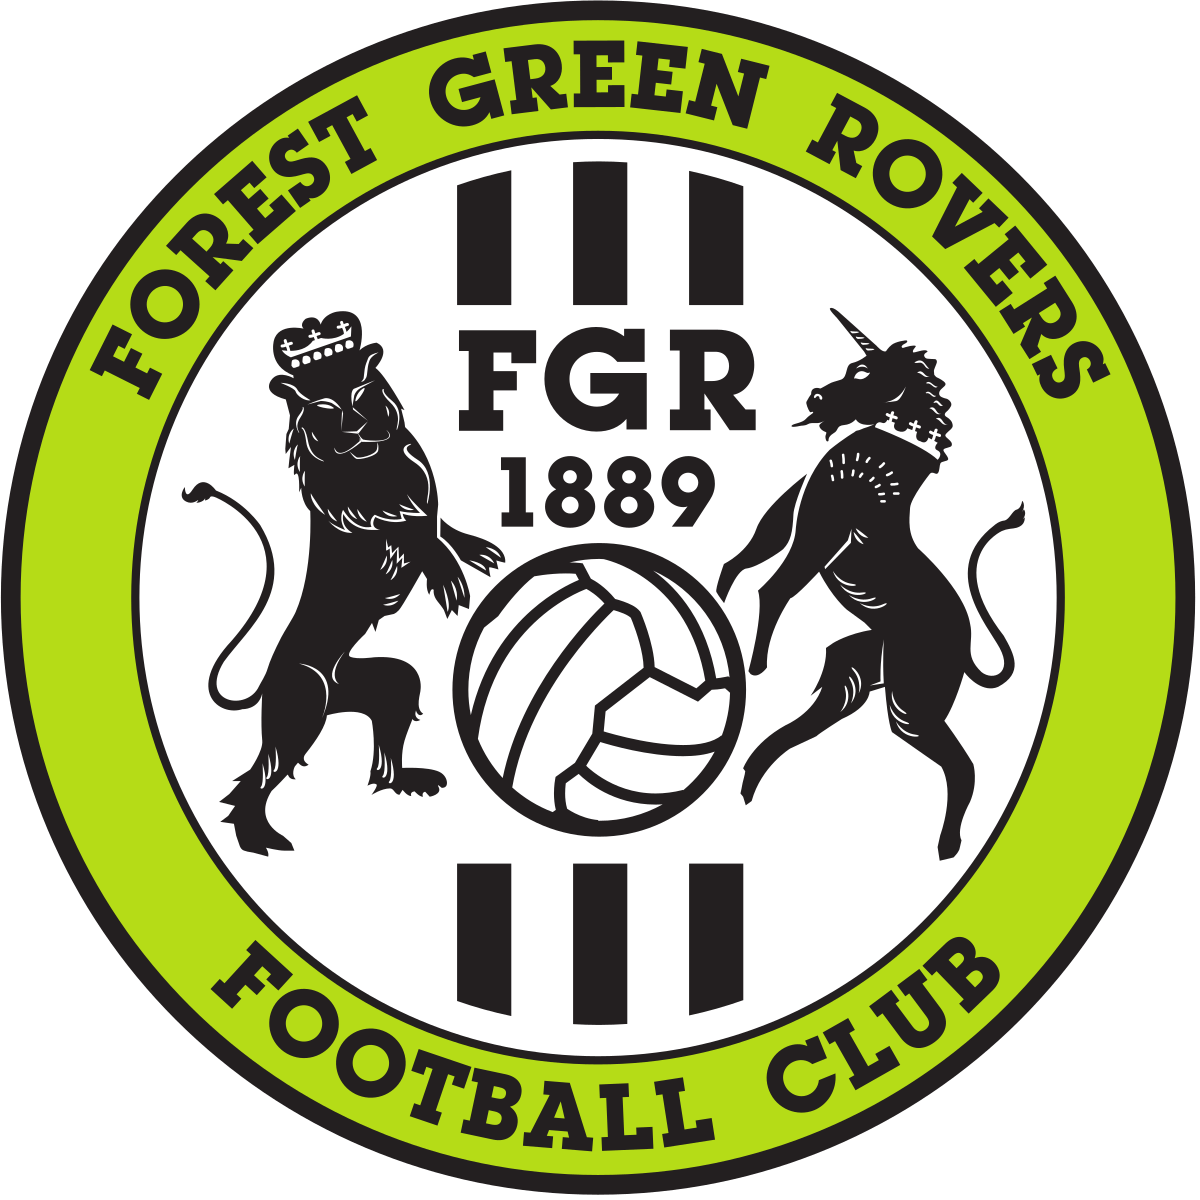 Green Badge Logo - Forest Green Rovers F.C.